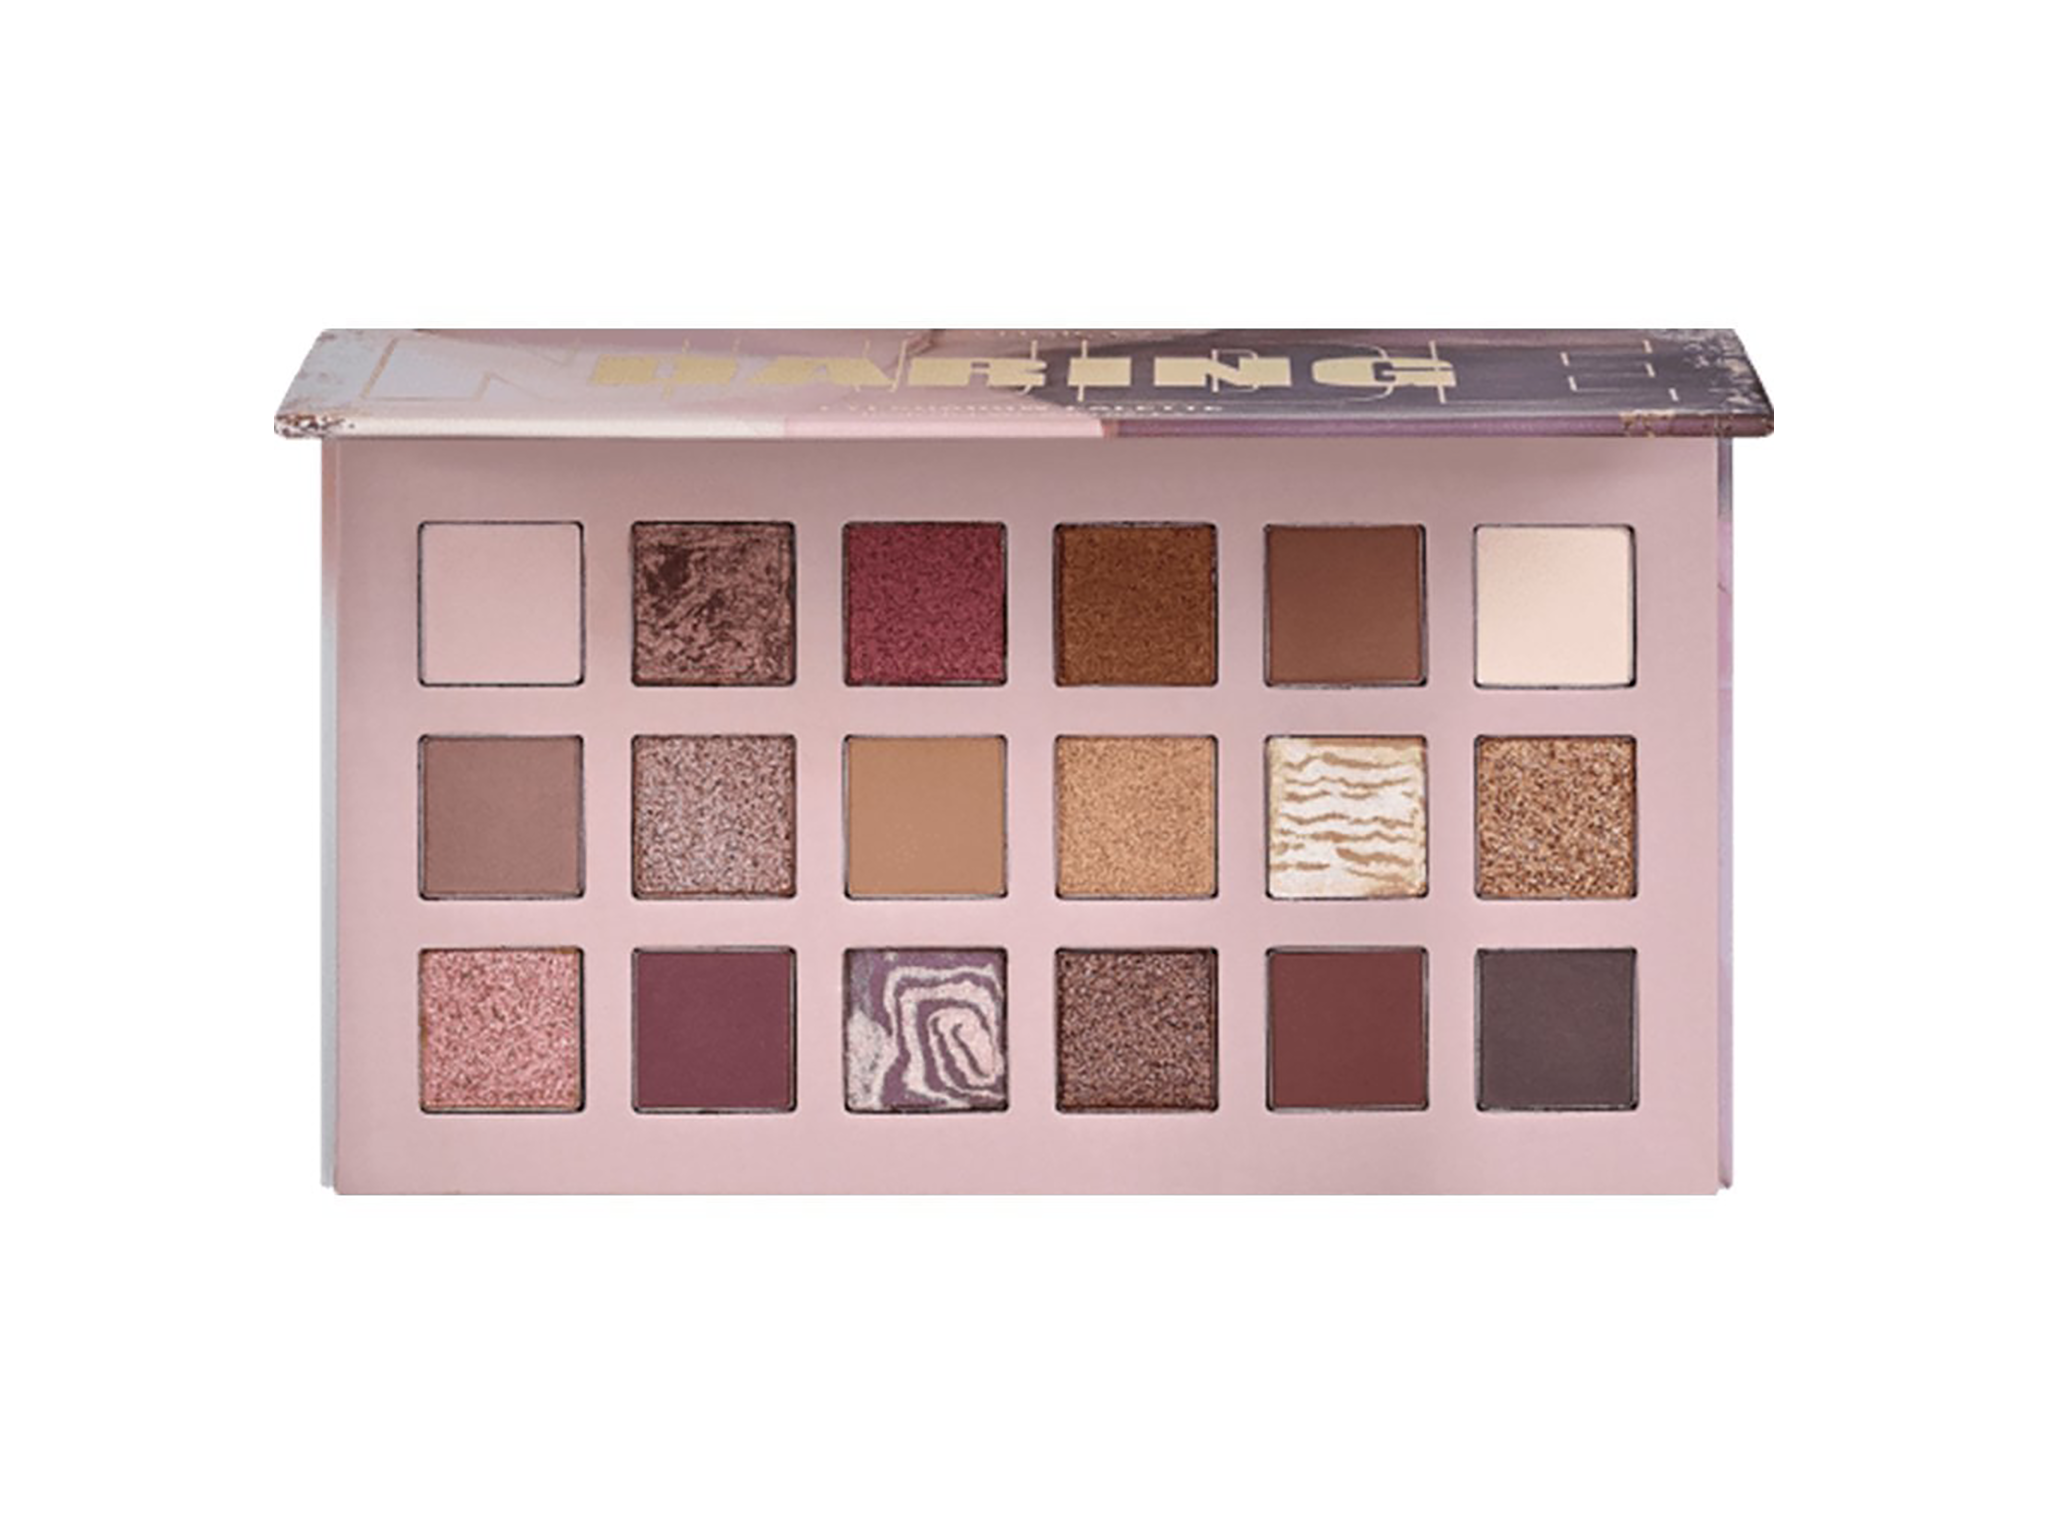 Catrice Cosmetics daring nude 18-colour eyeshadow palette